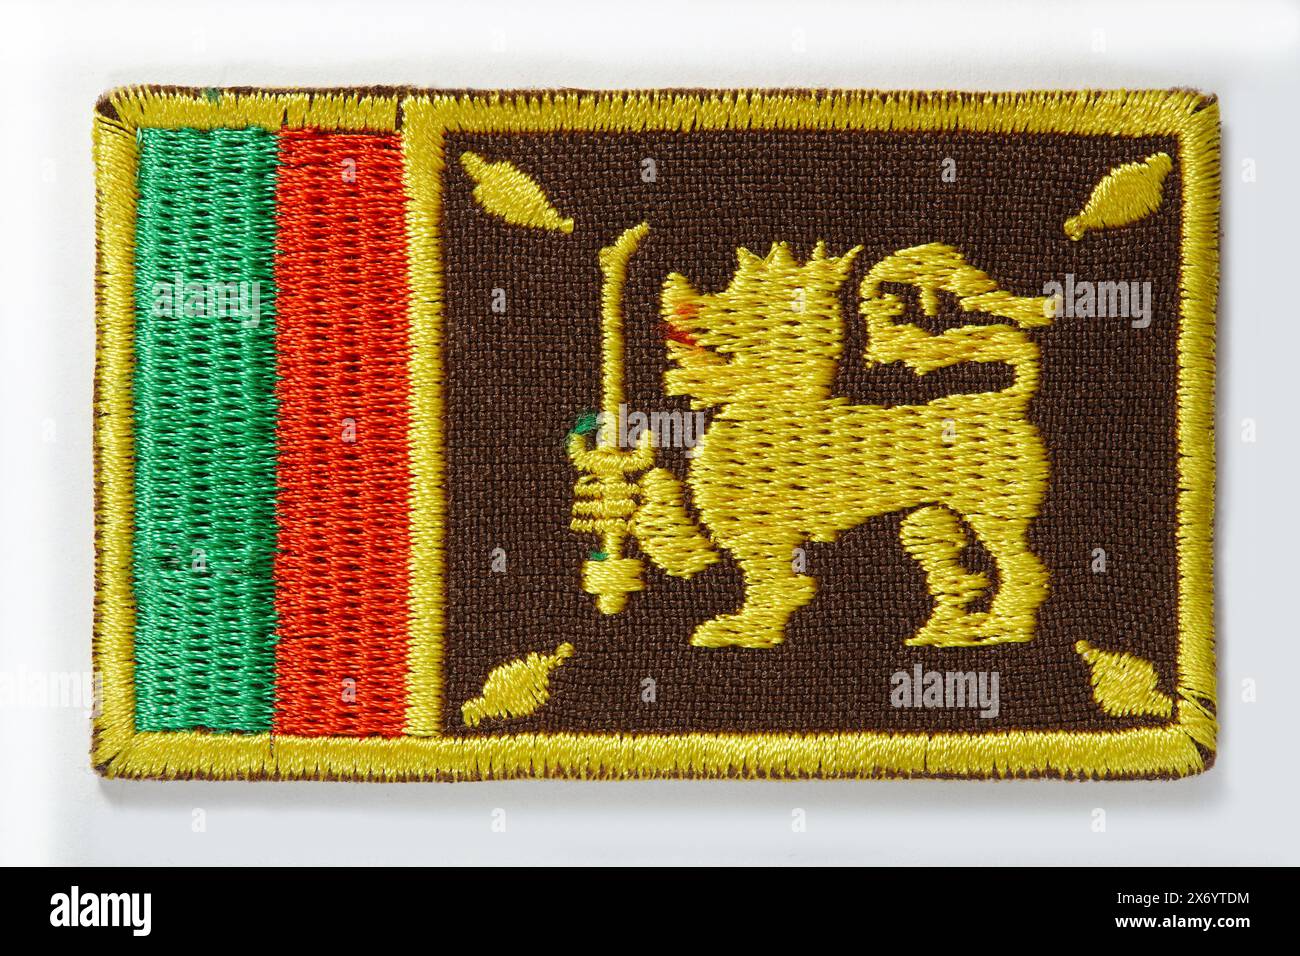 Embroidered emblem of the Sri Lankan national flag, also known as the lion flag Stock Photo